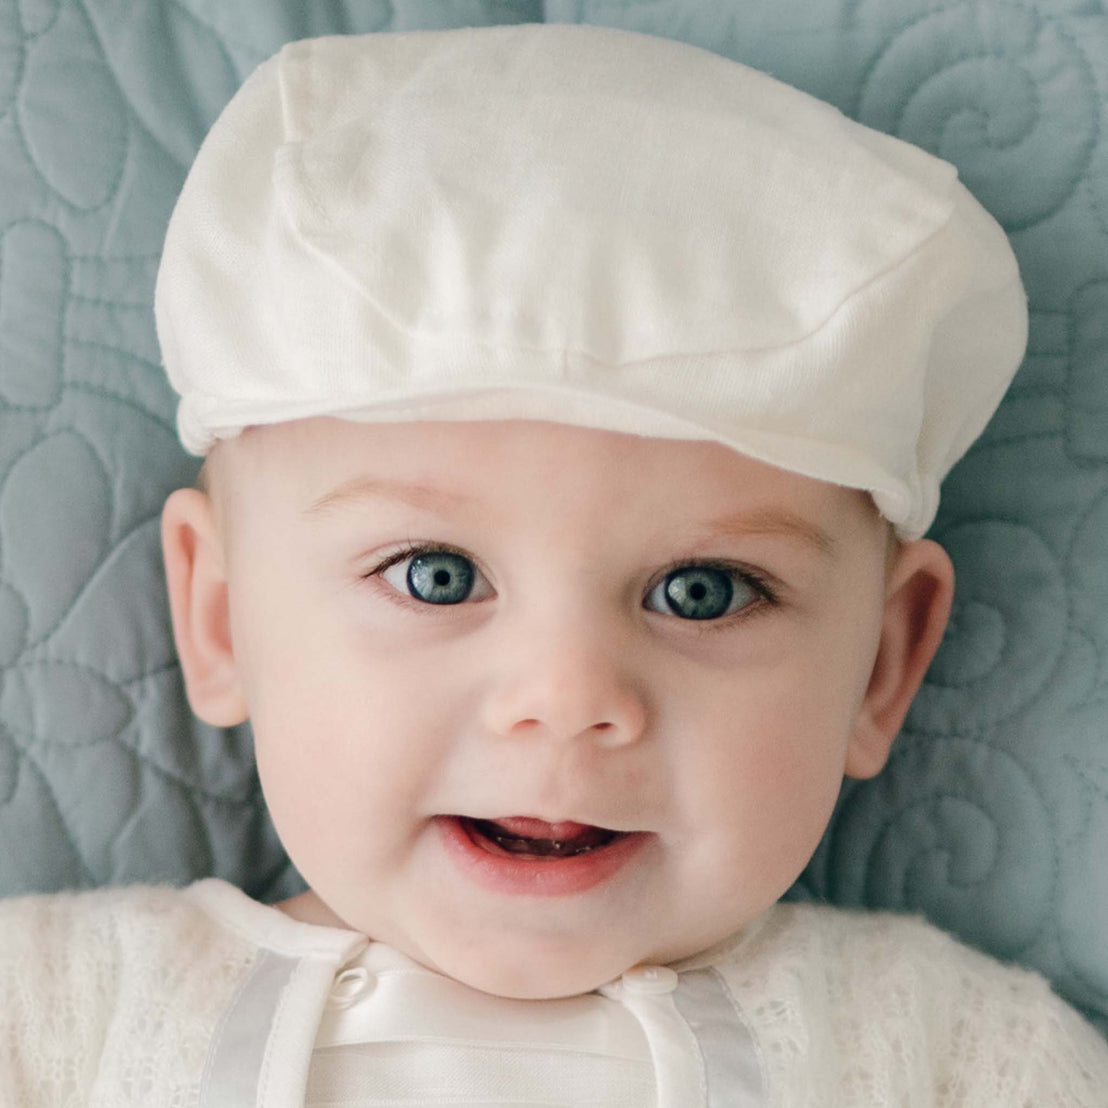 Close-up of a baby with bright blue eyes, smiling while wearing an Oliver Linen Newsboy Cap and matching white outfit. The background is a light blue quilted fabric.